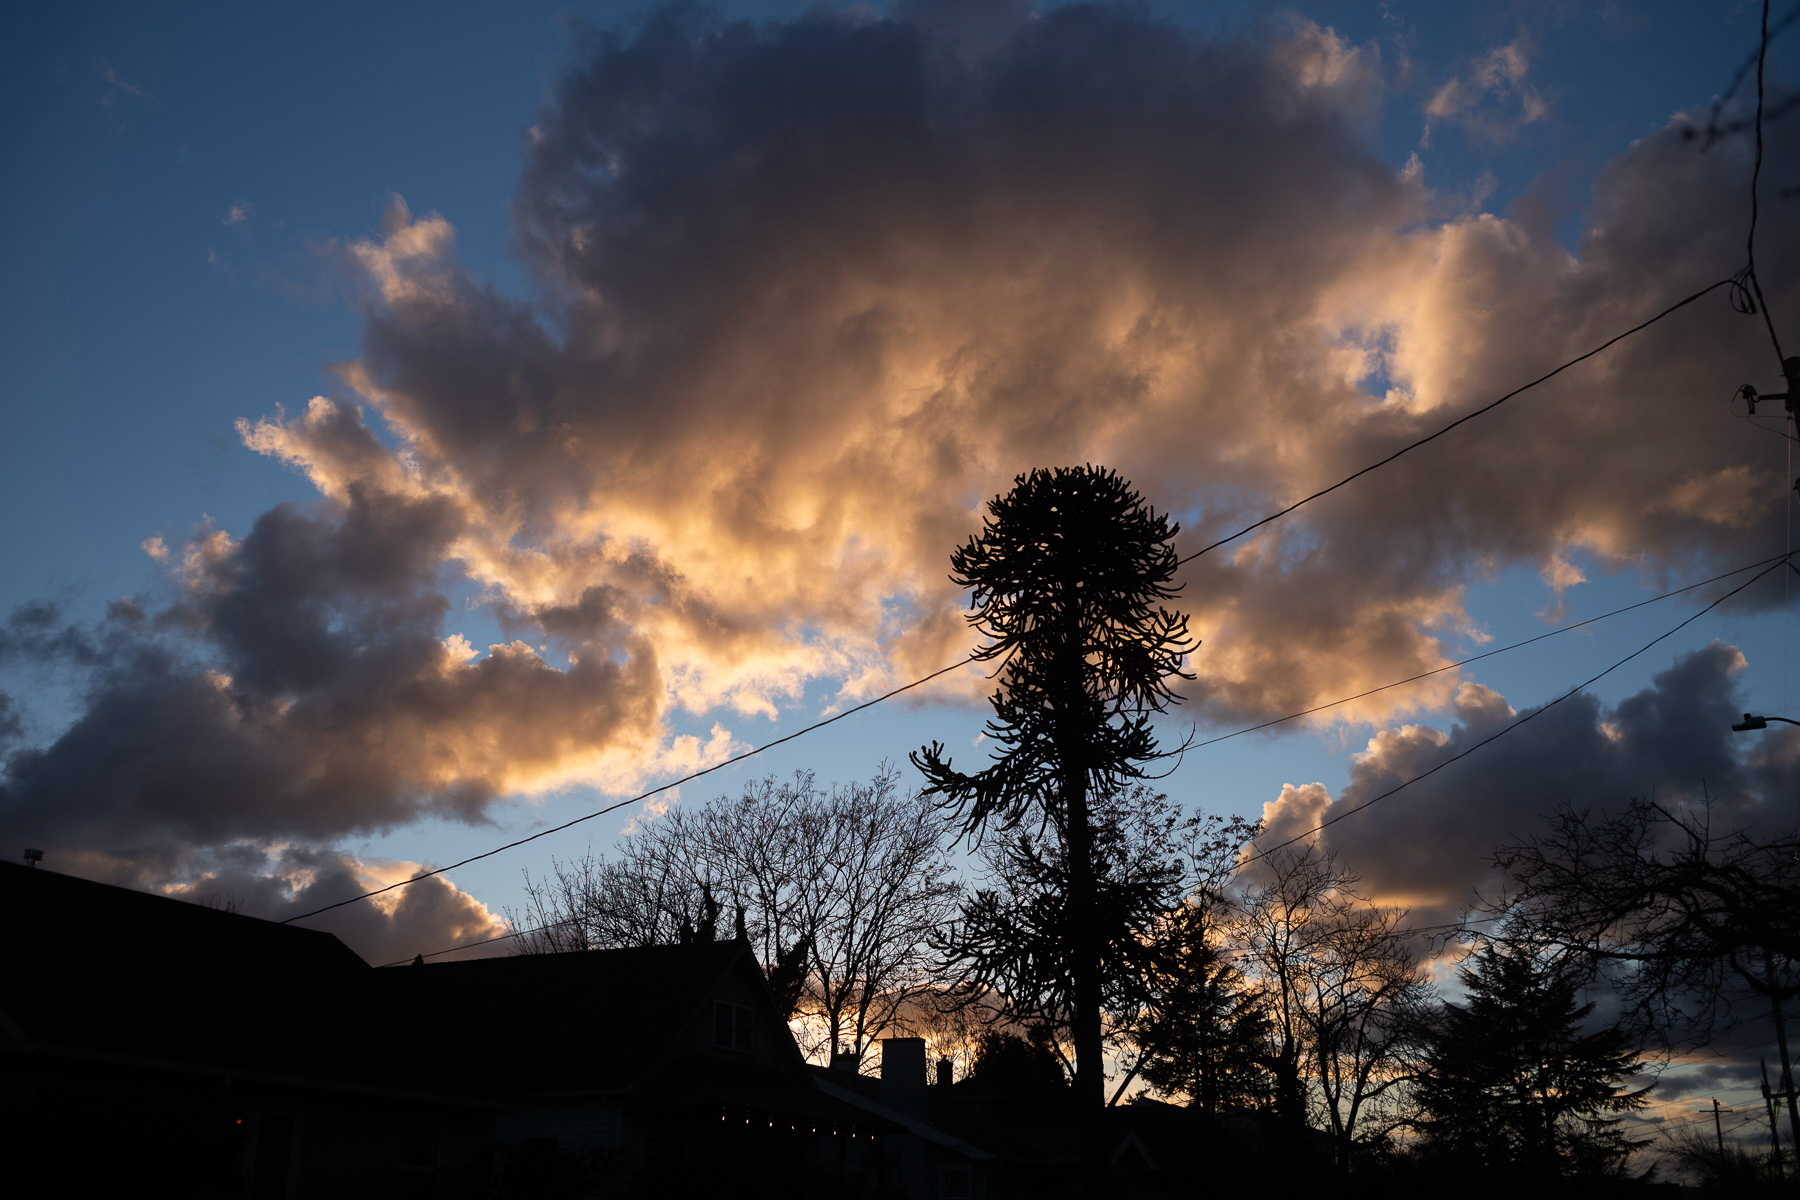 Silhouette of a “monkey puzzle” tree and residential houses at sunset with clouds illuminated by the golden light against a darkening sky. Power lines intersect the view.